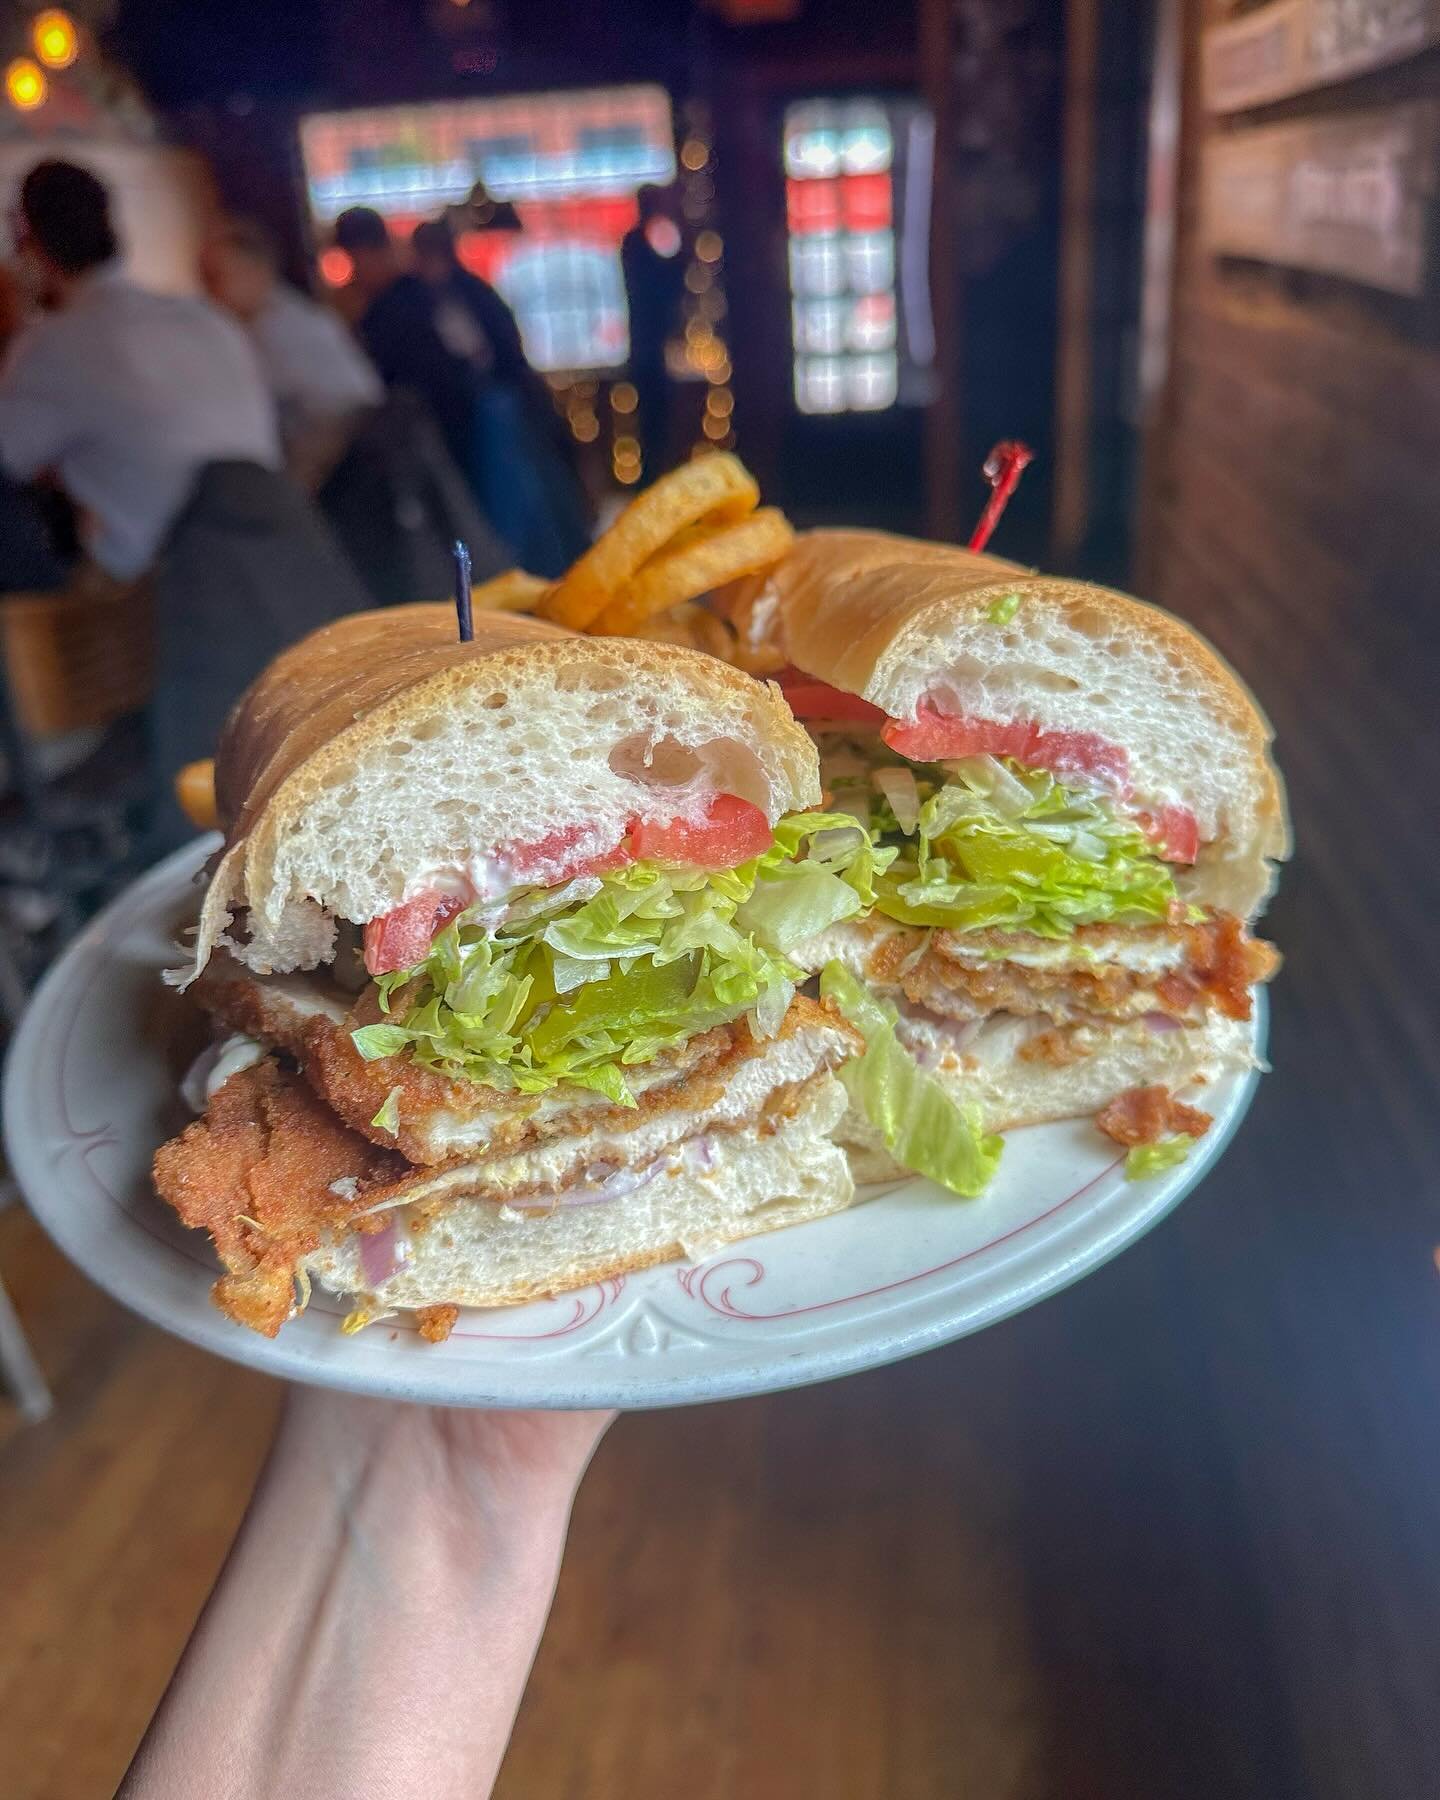 A coincidence that the championship game for UConn&rsquo;s 6th national title falls on $6 grinder day? We think not! Let&rsquo;s gooooo UConn!!! Grab your $6 game day grinder and fuel up for tonight! 🏀🥪🍺🎉

$6 grinders &mdash; every Monday and Tue